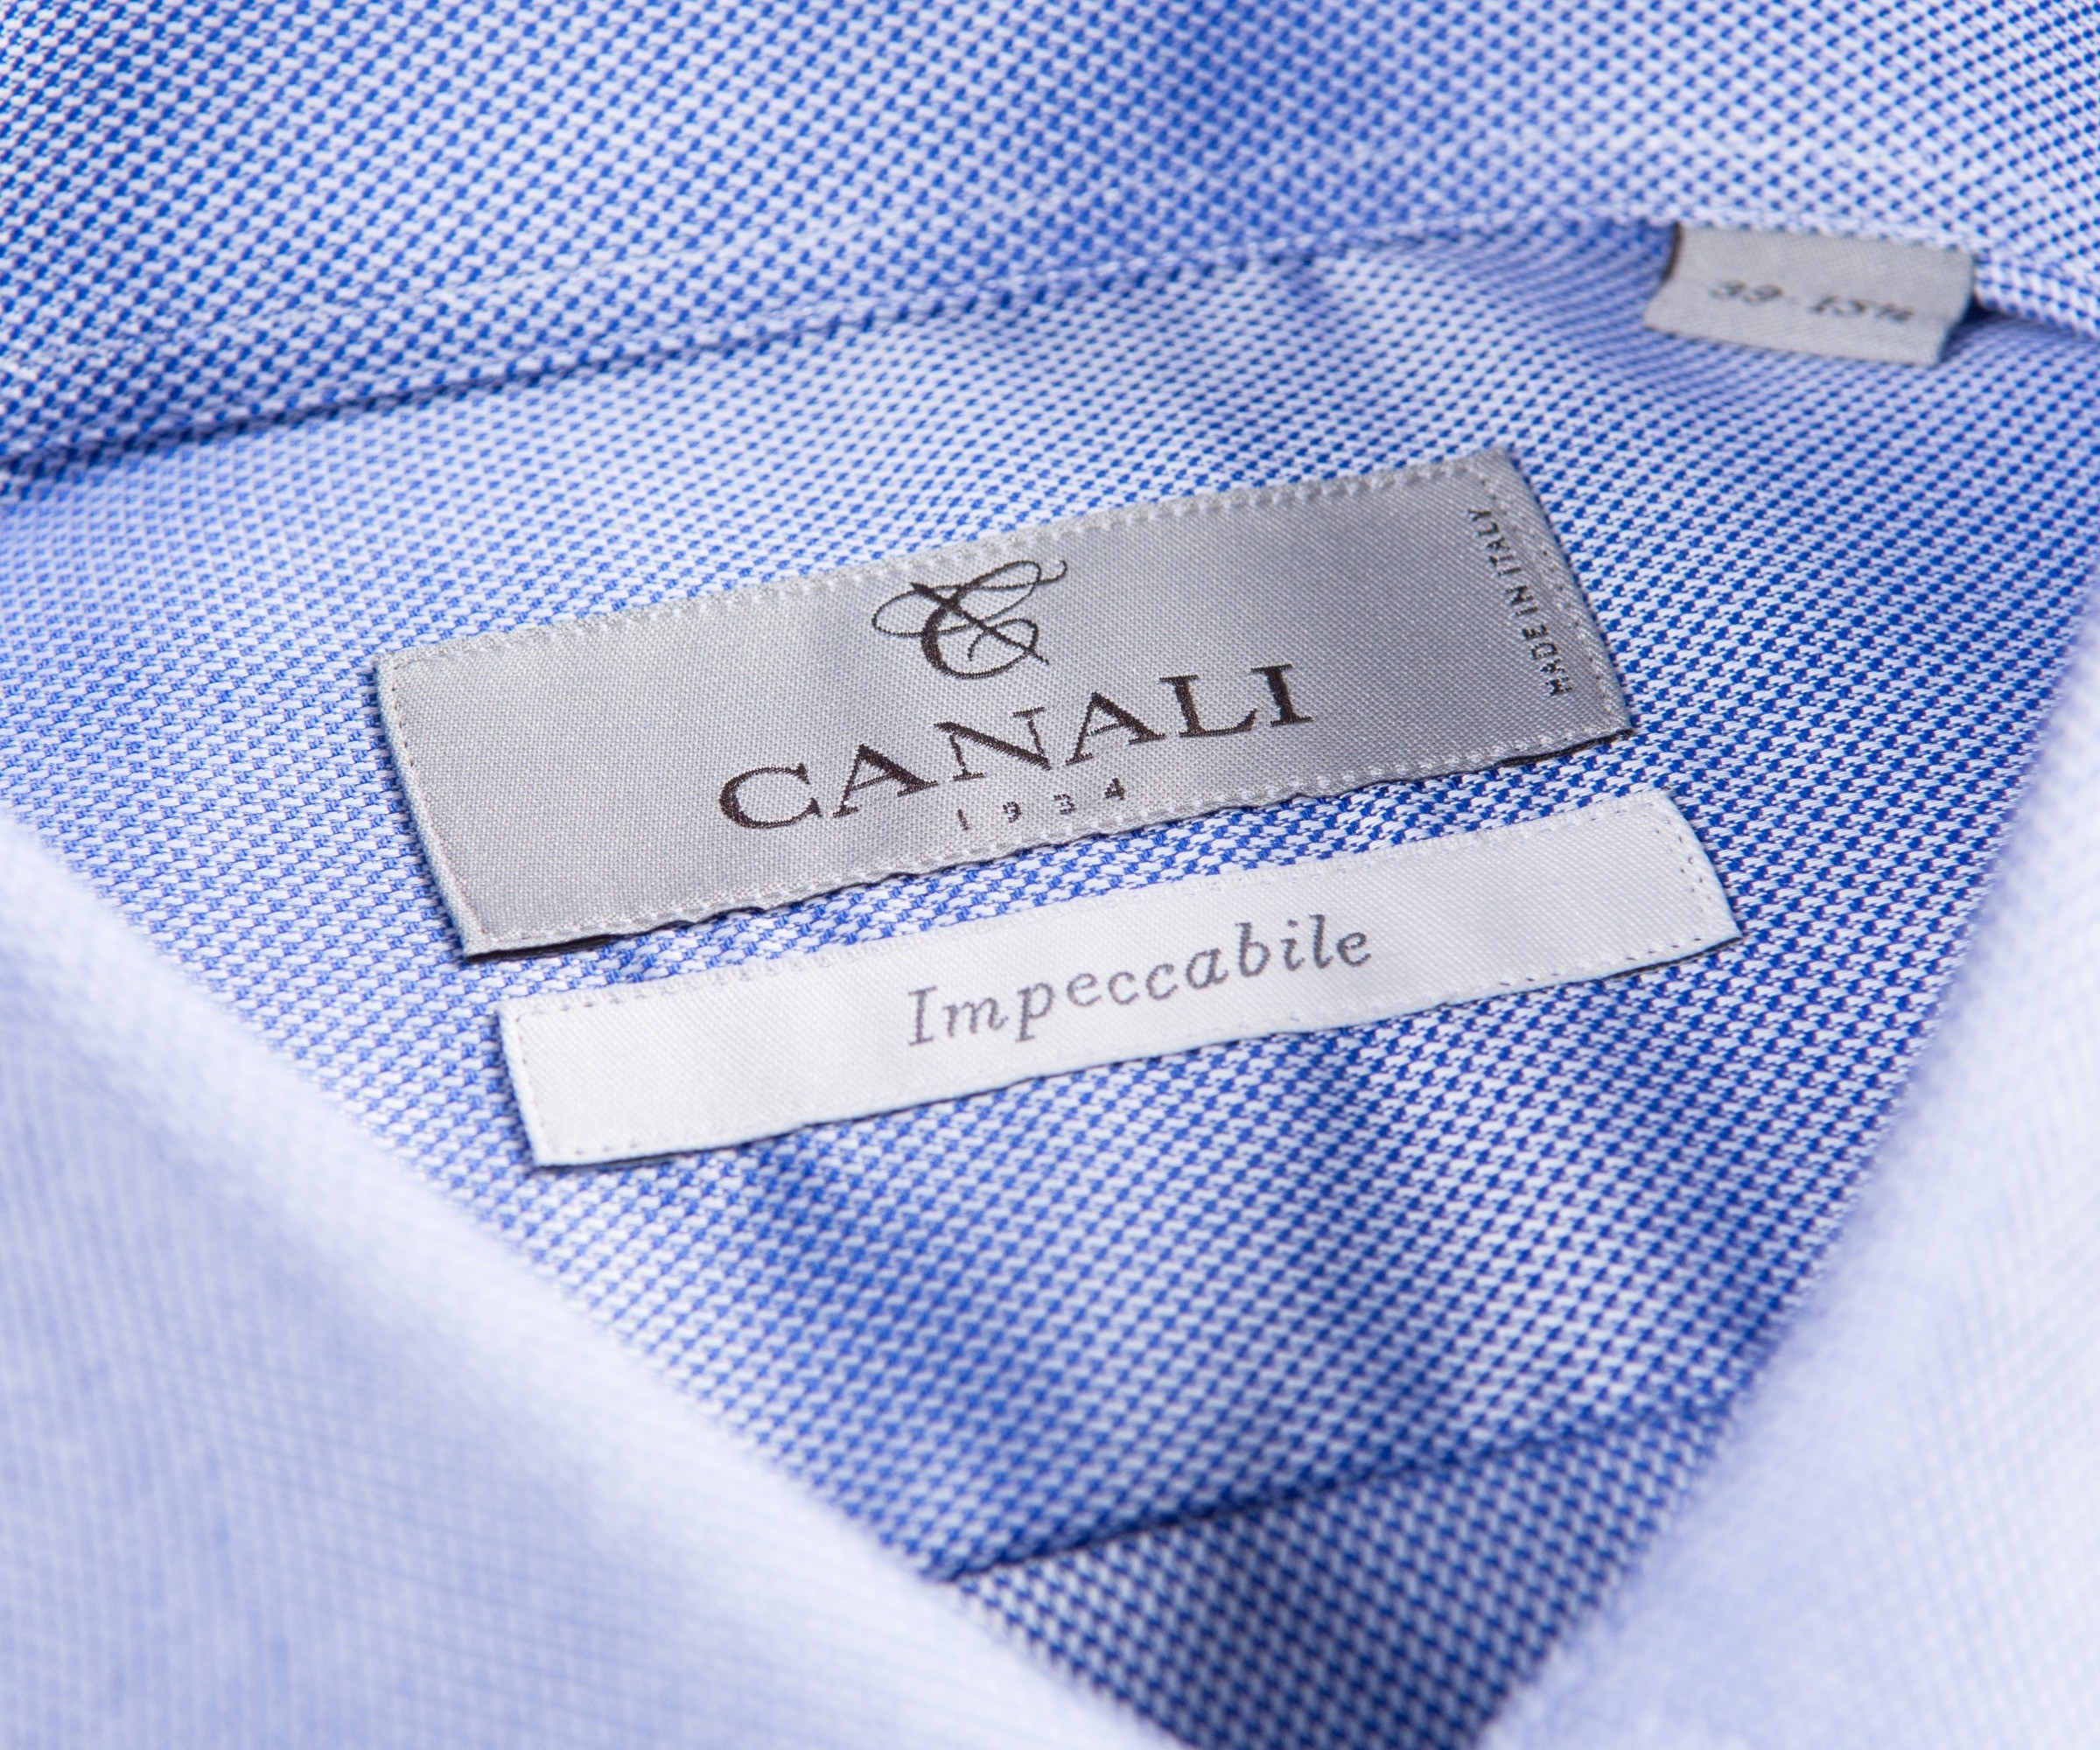 Canali Modern Fit 'Impeccabile' Luxury Oxford Formal Shirt Blue